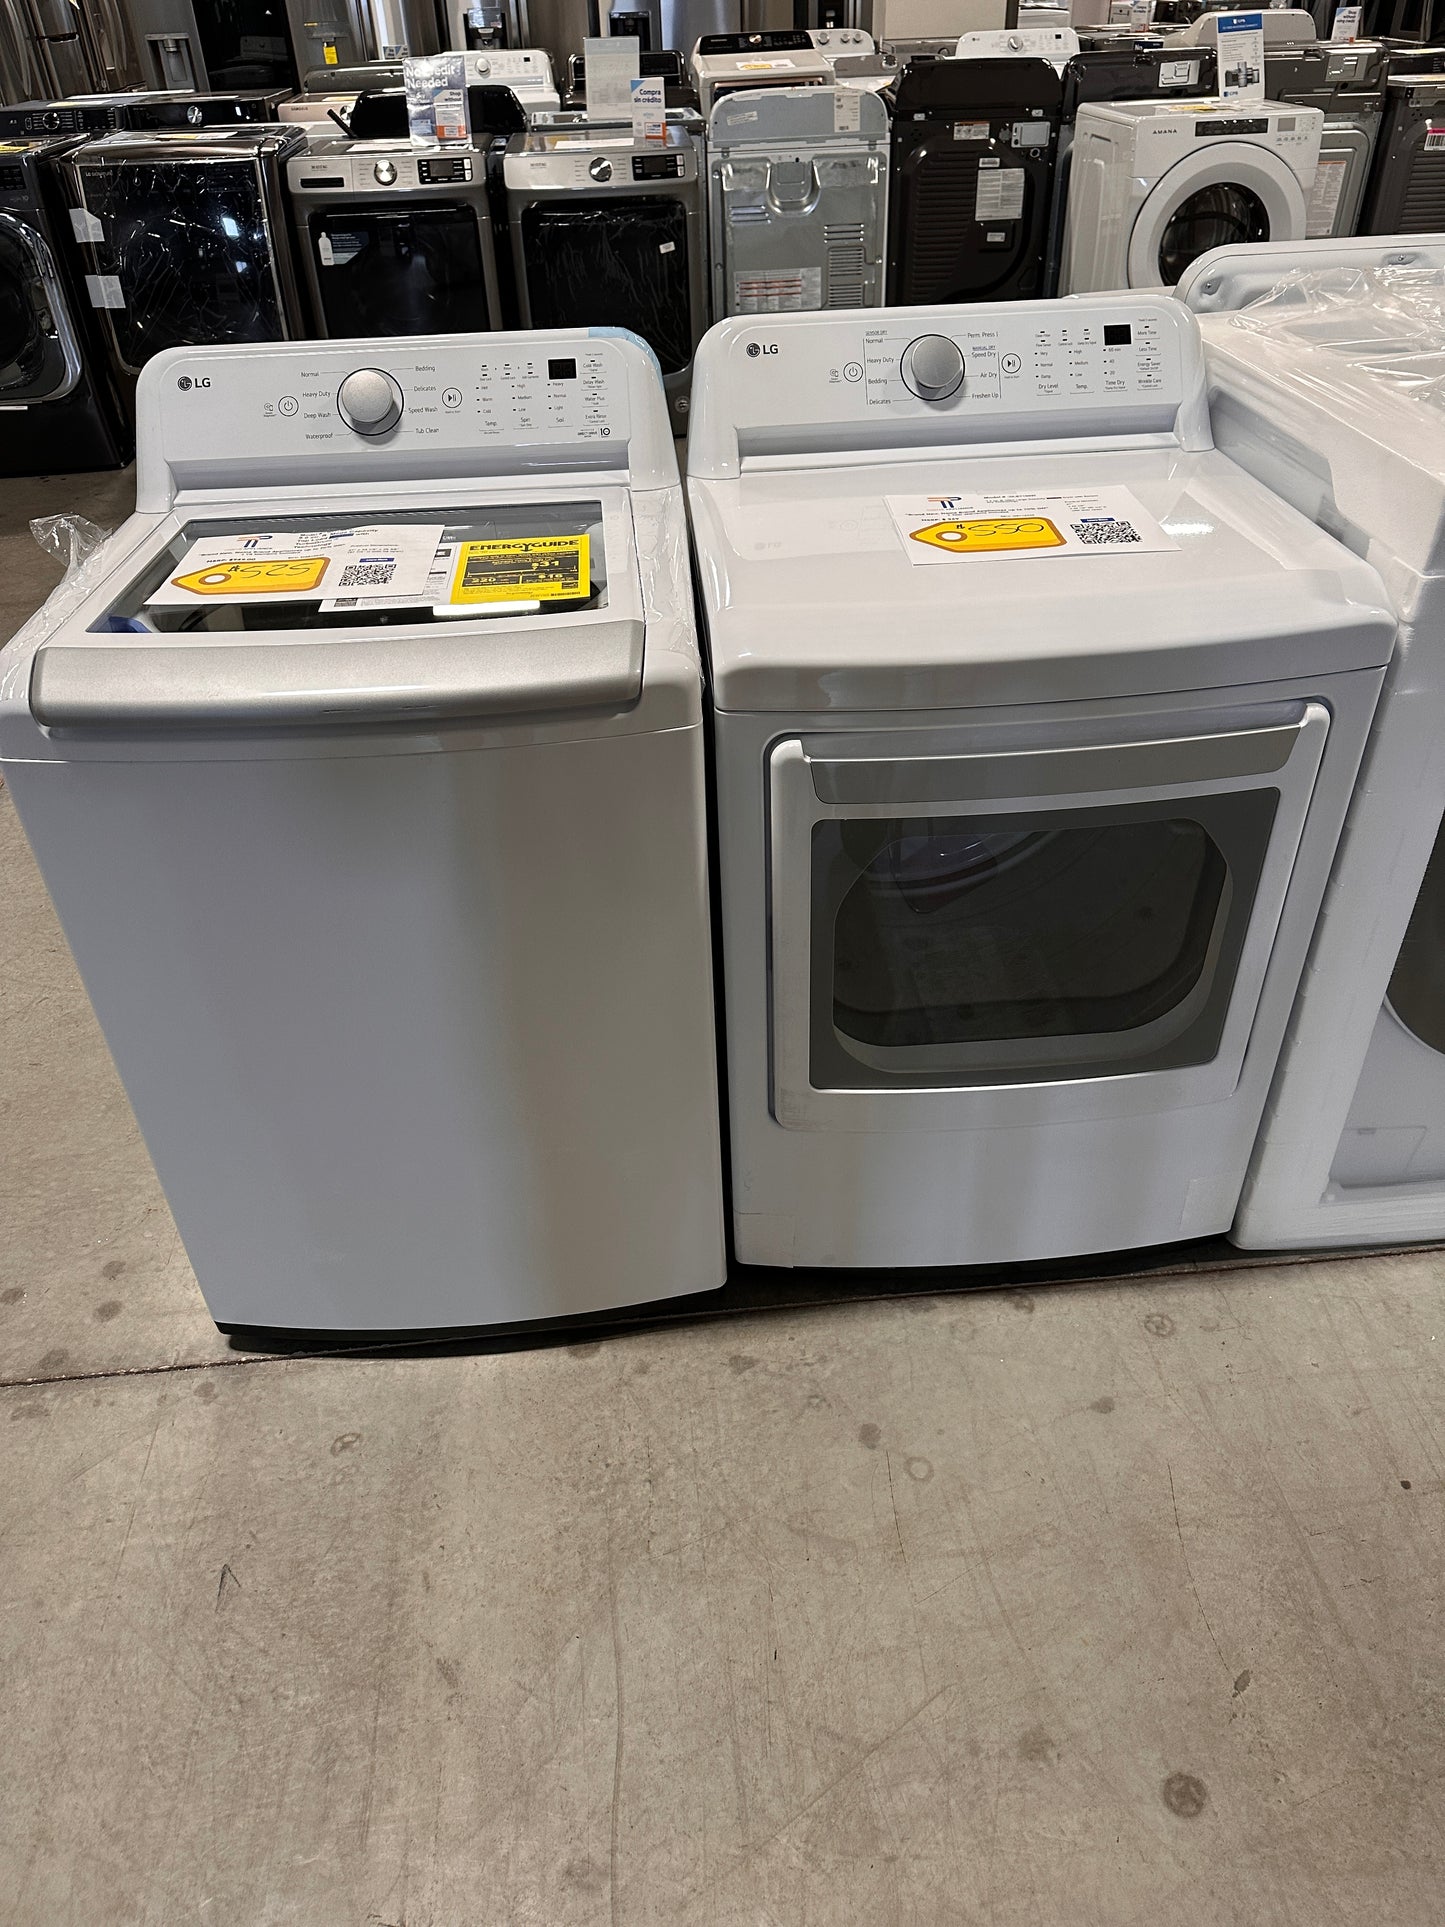 BEAUTIFUL TOP LOAD WASHER ELECTRIC DRYER LAUNDRY SET WAS13043 DRY12324